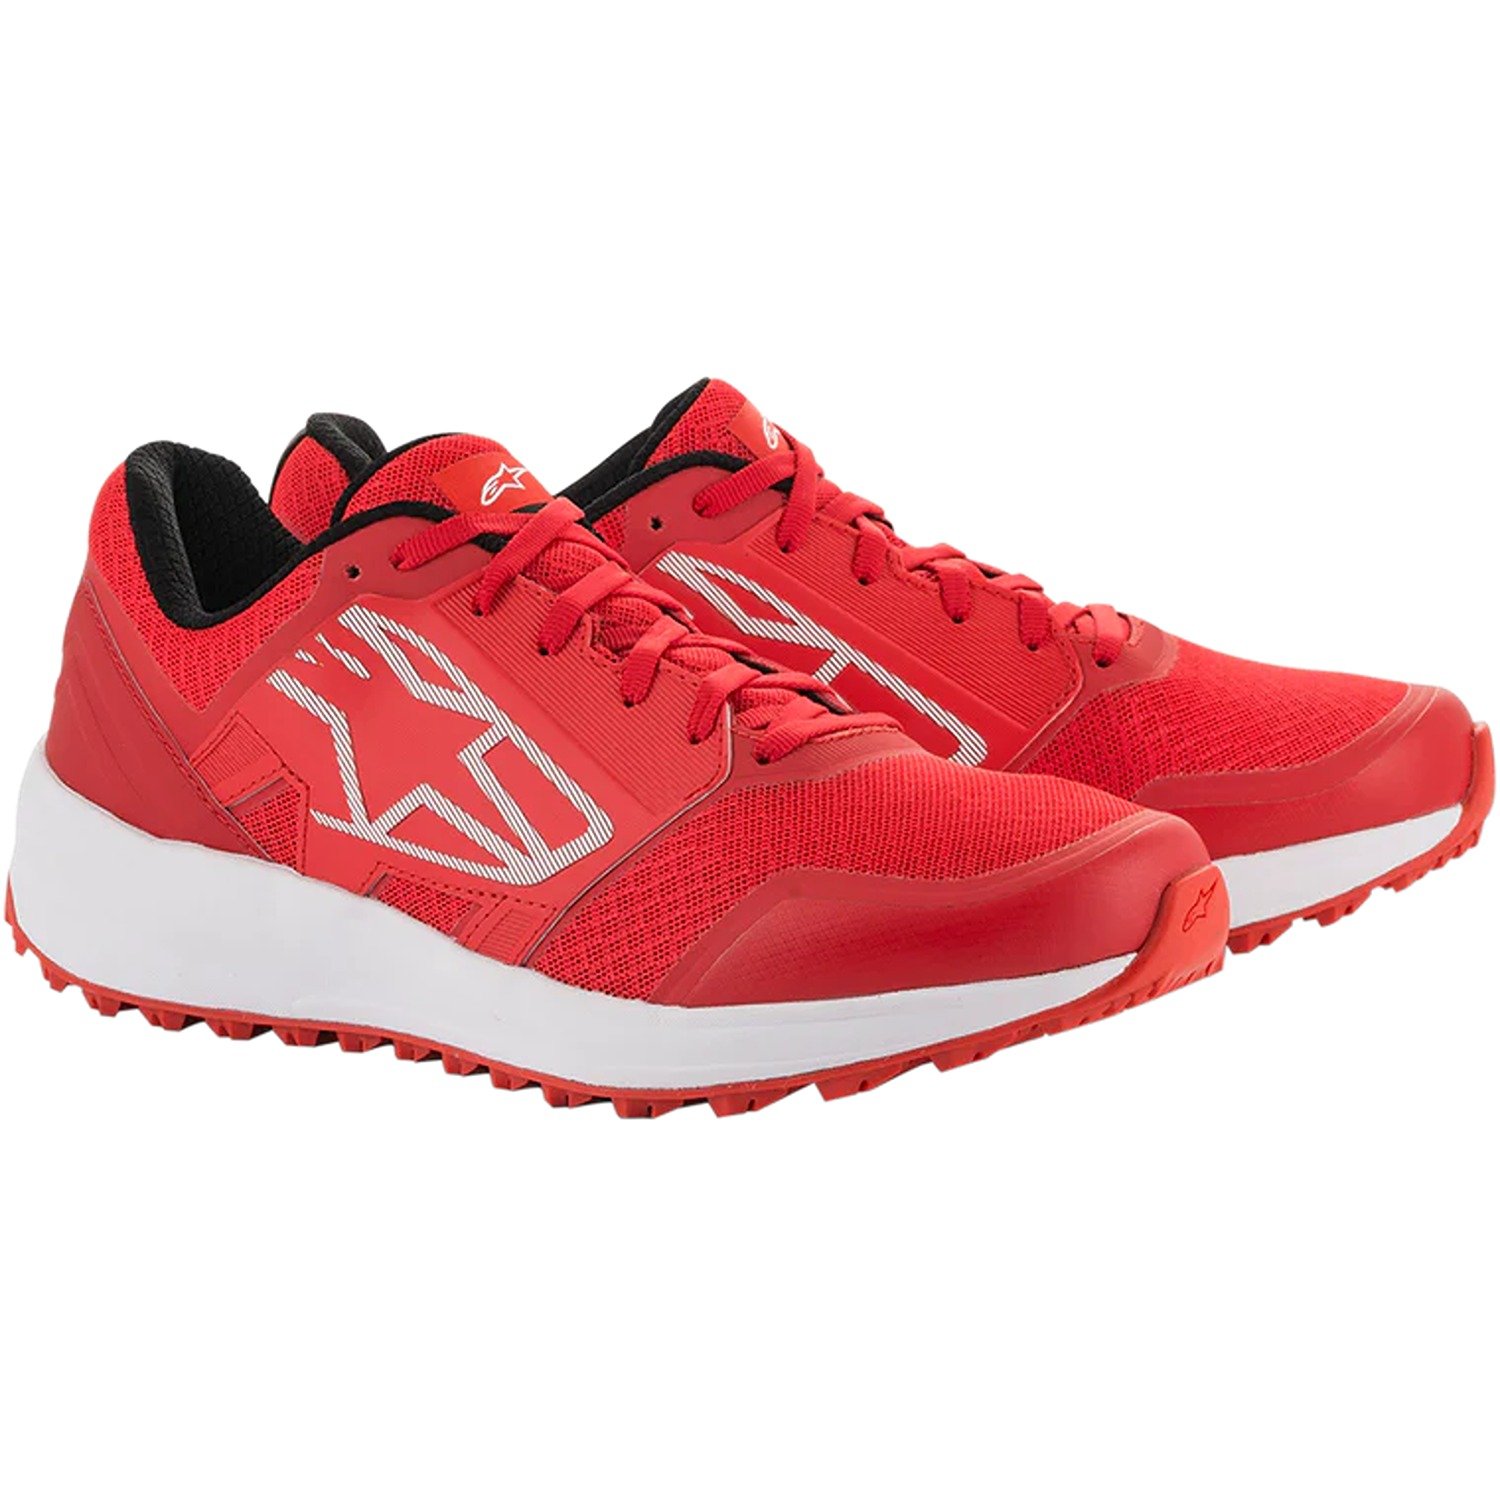 Image of Alpinestars Meta Trail Shoes Red White Taille US 115